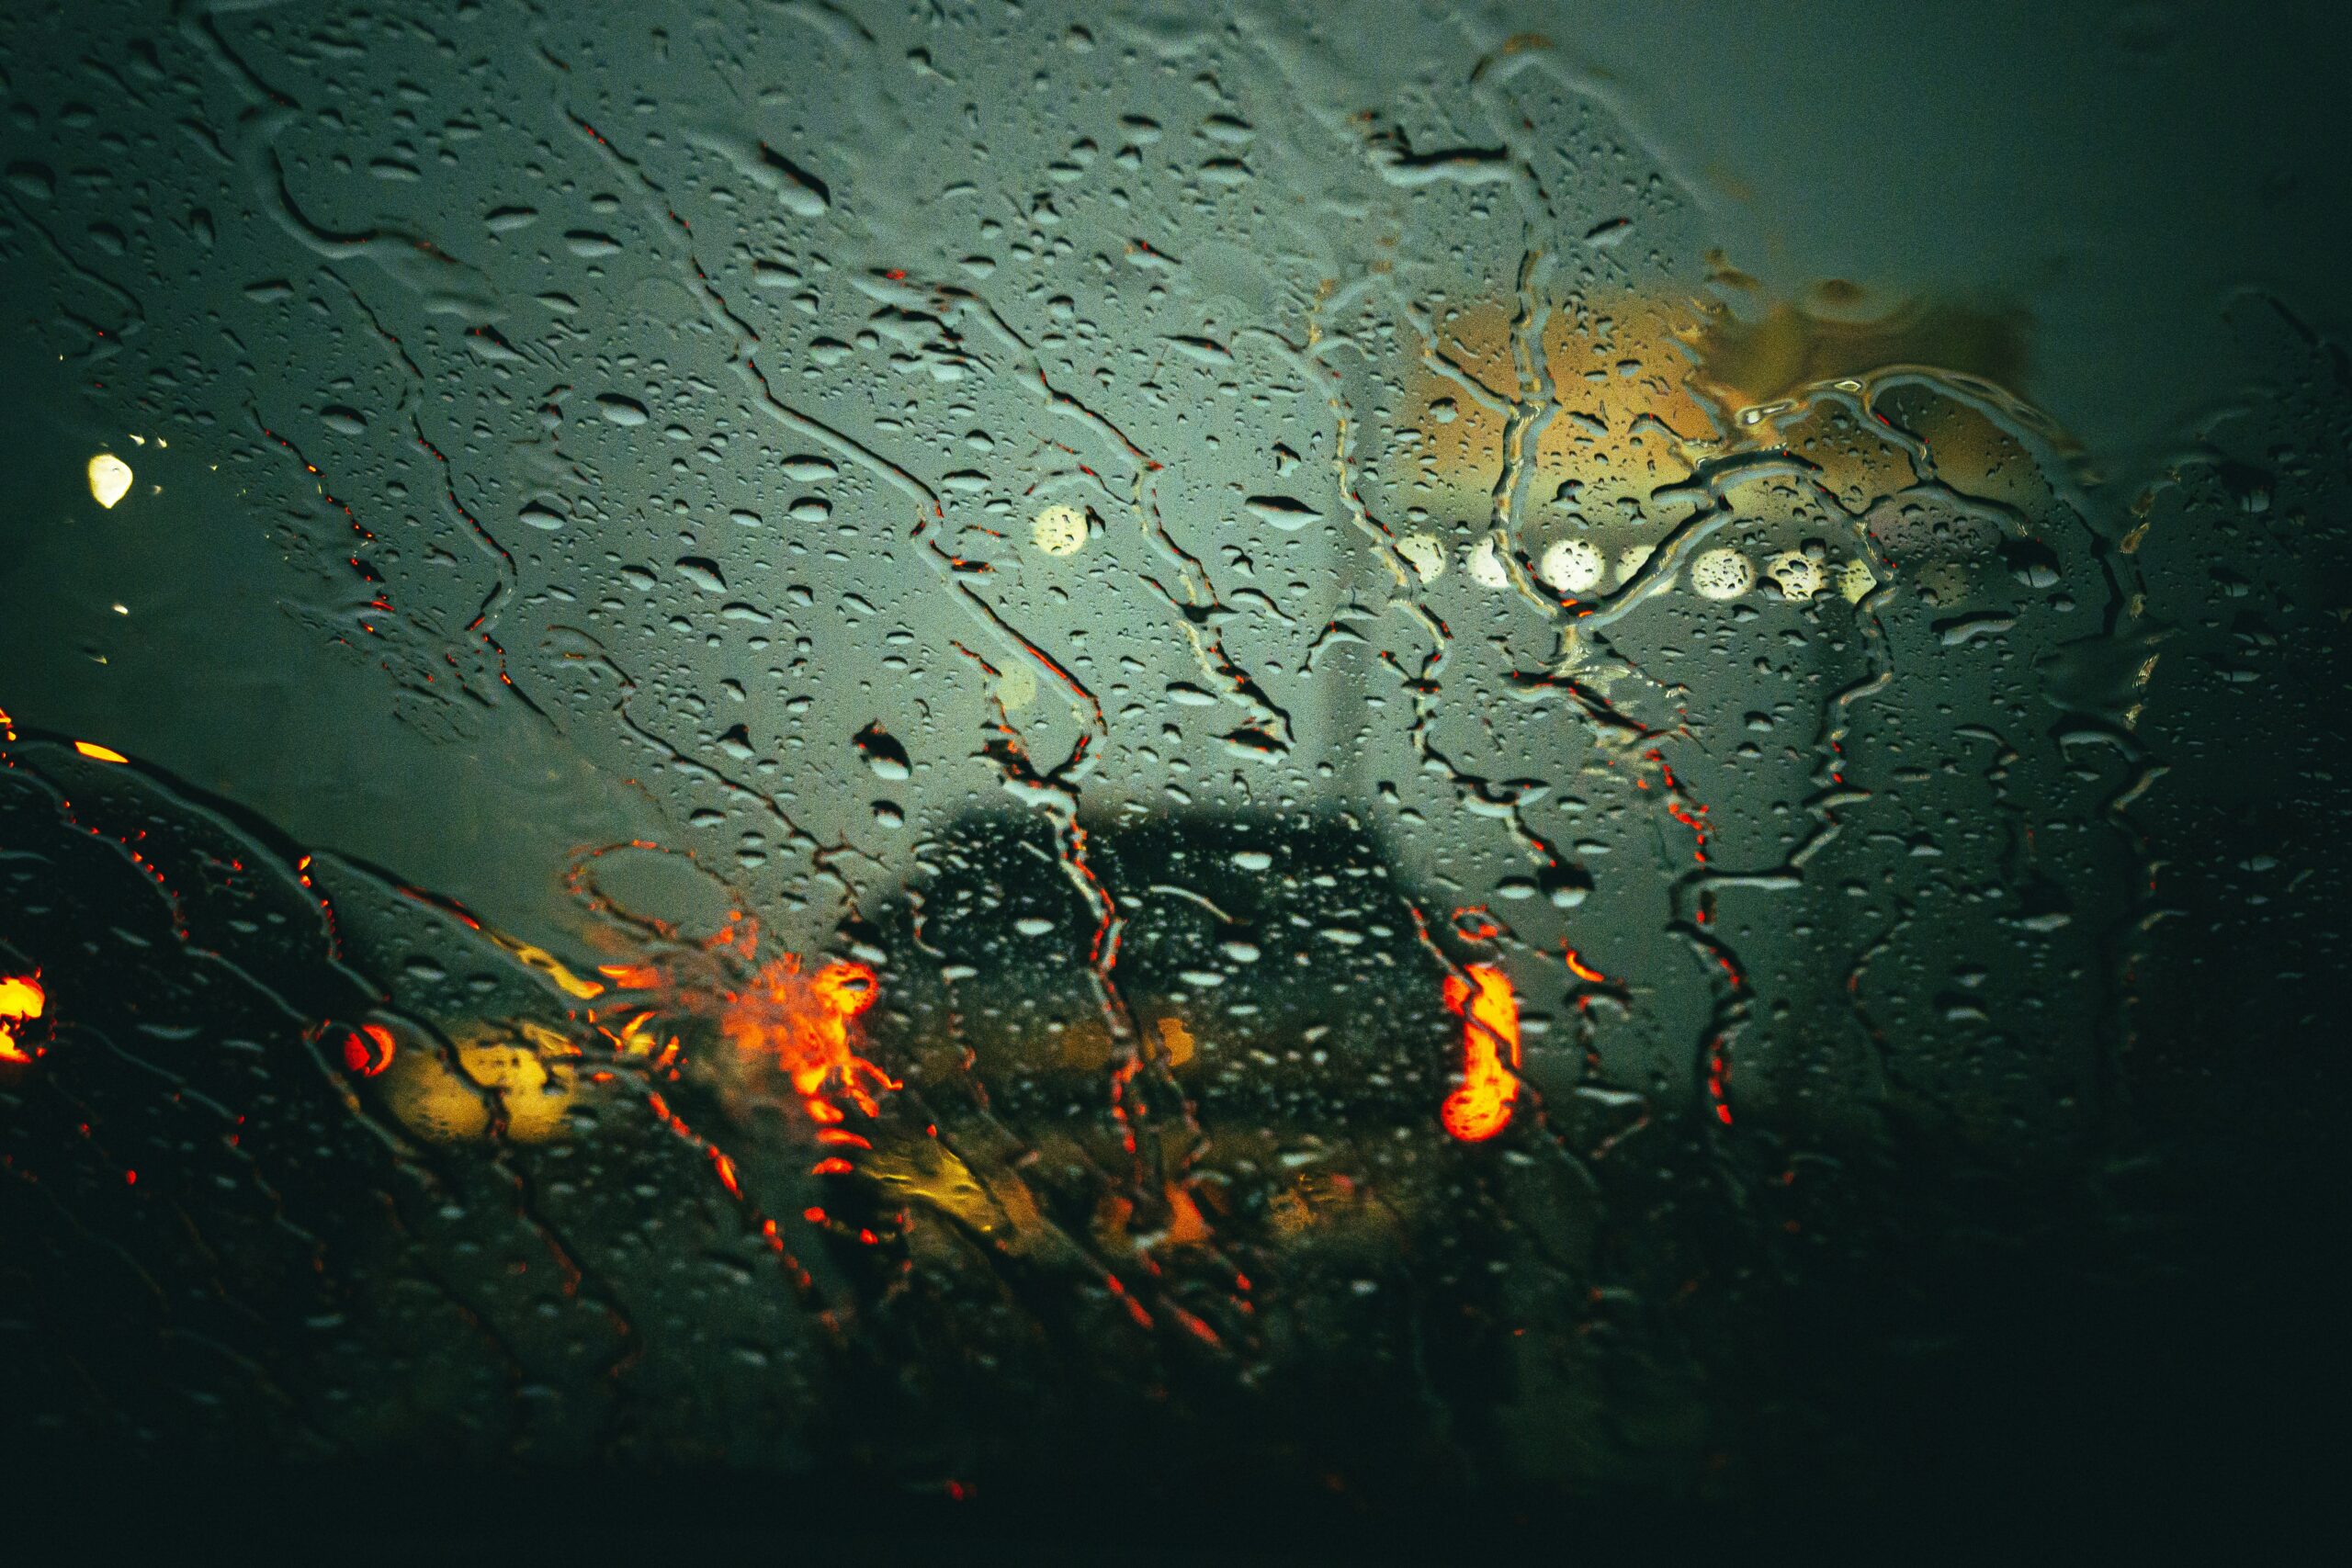 Raindrops on a car windshield reflect the red taillights of vehicles ahead, highlighting stormy weather conditions in Fort Worth, suitable for promoting storm damage tree cleanup services.